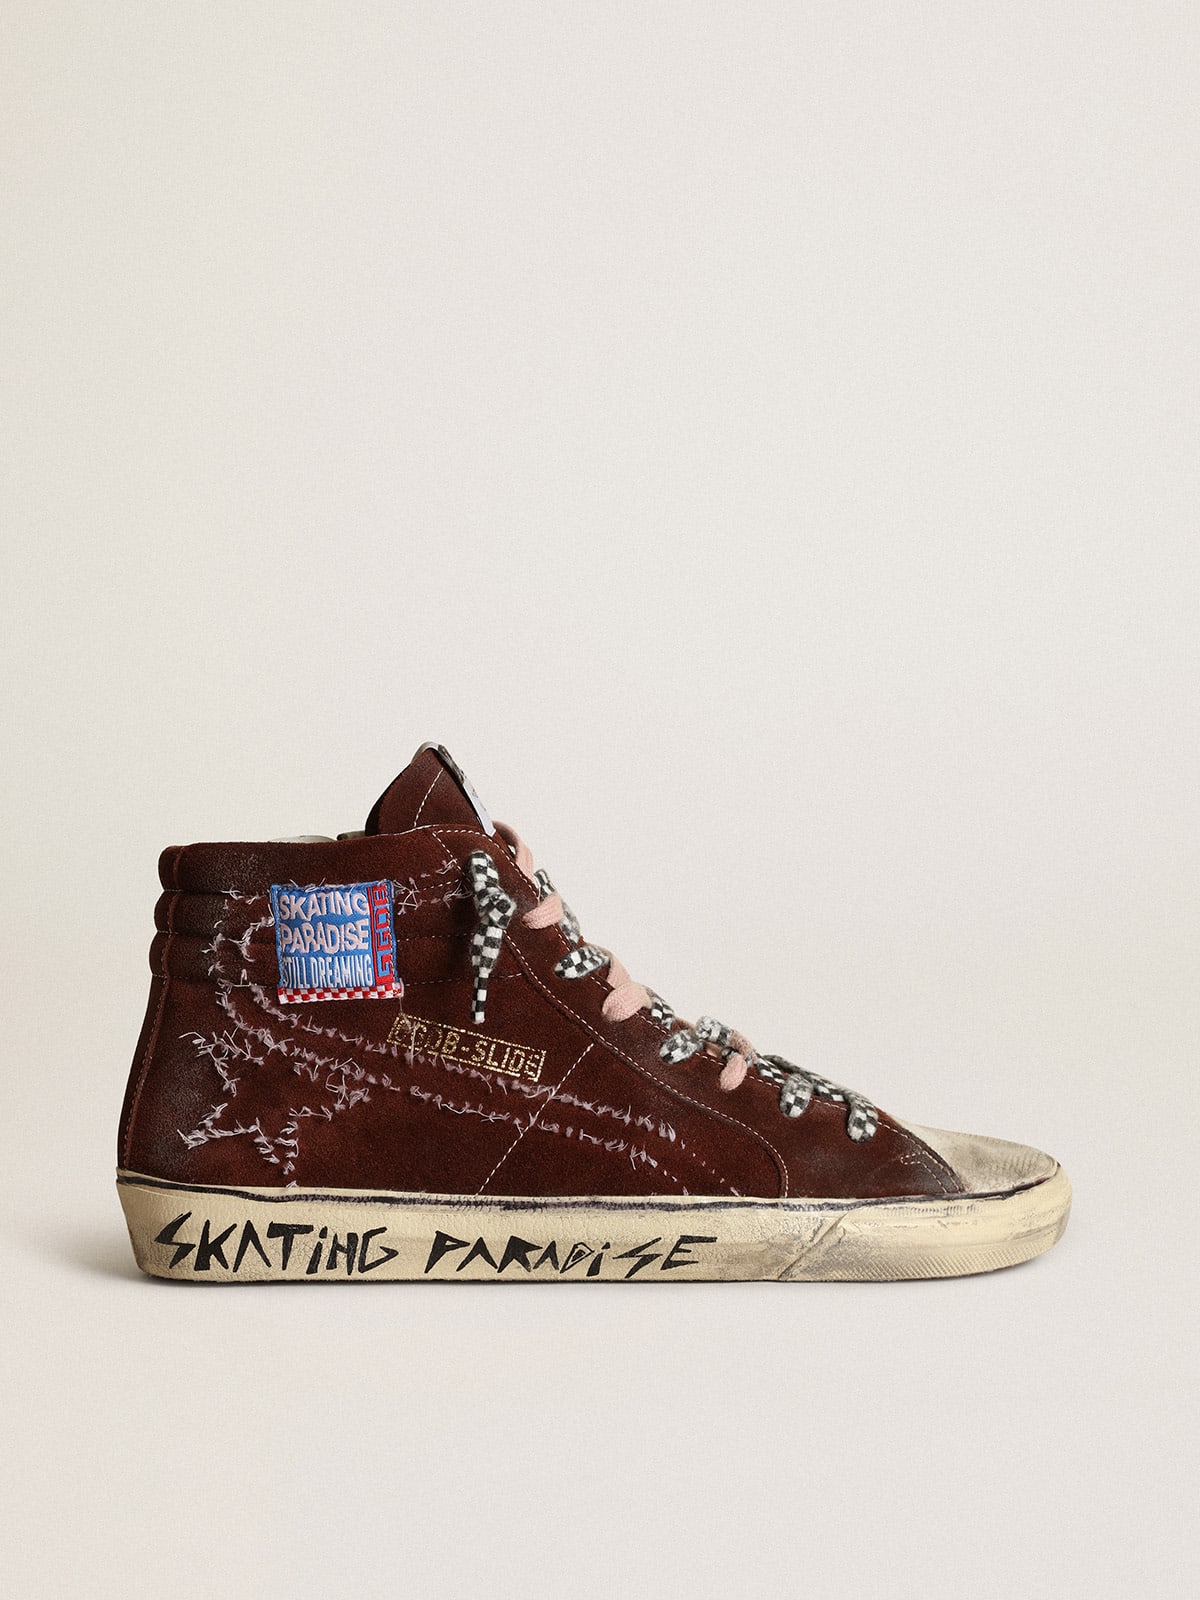 Slide sneakers in chocolate-colored suede with white stitching on the star and flash